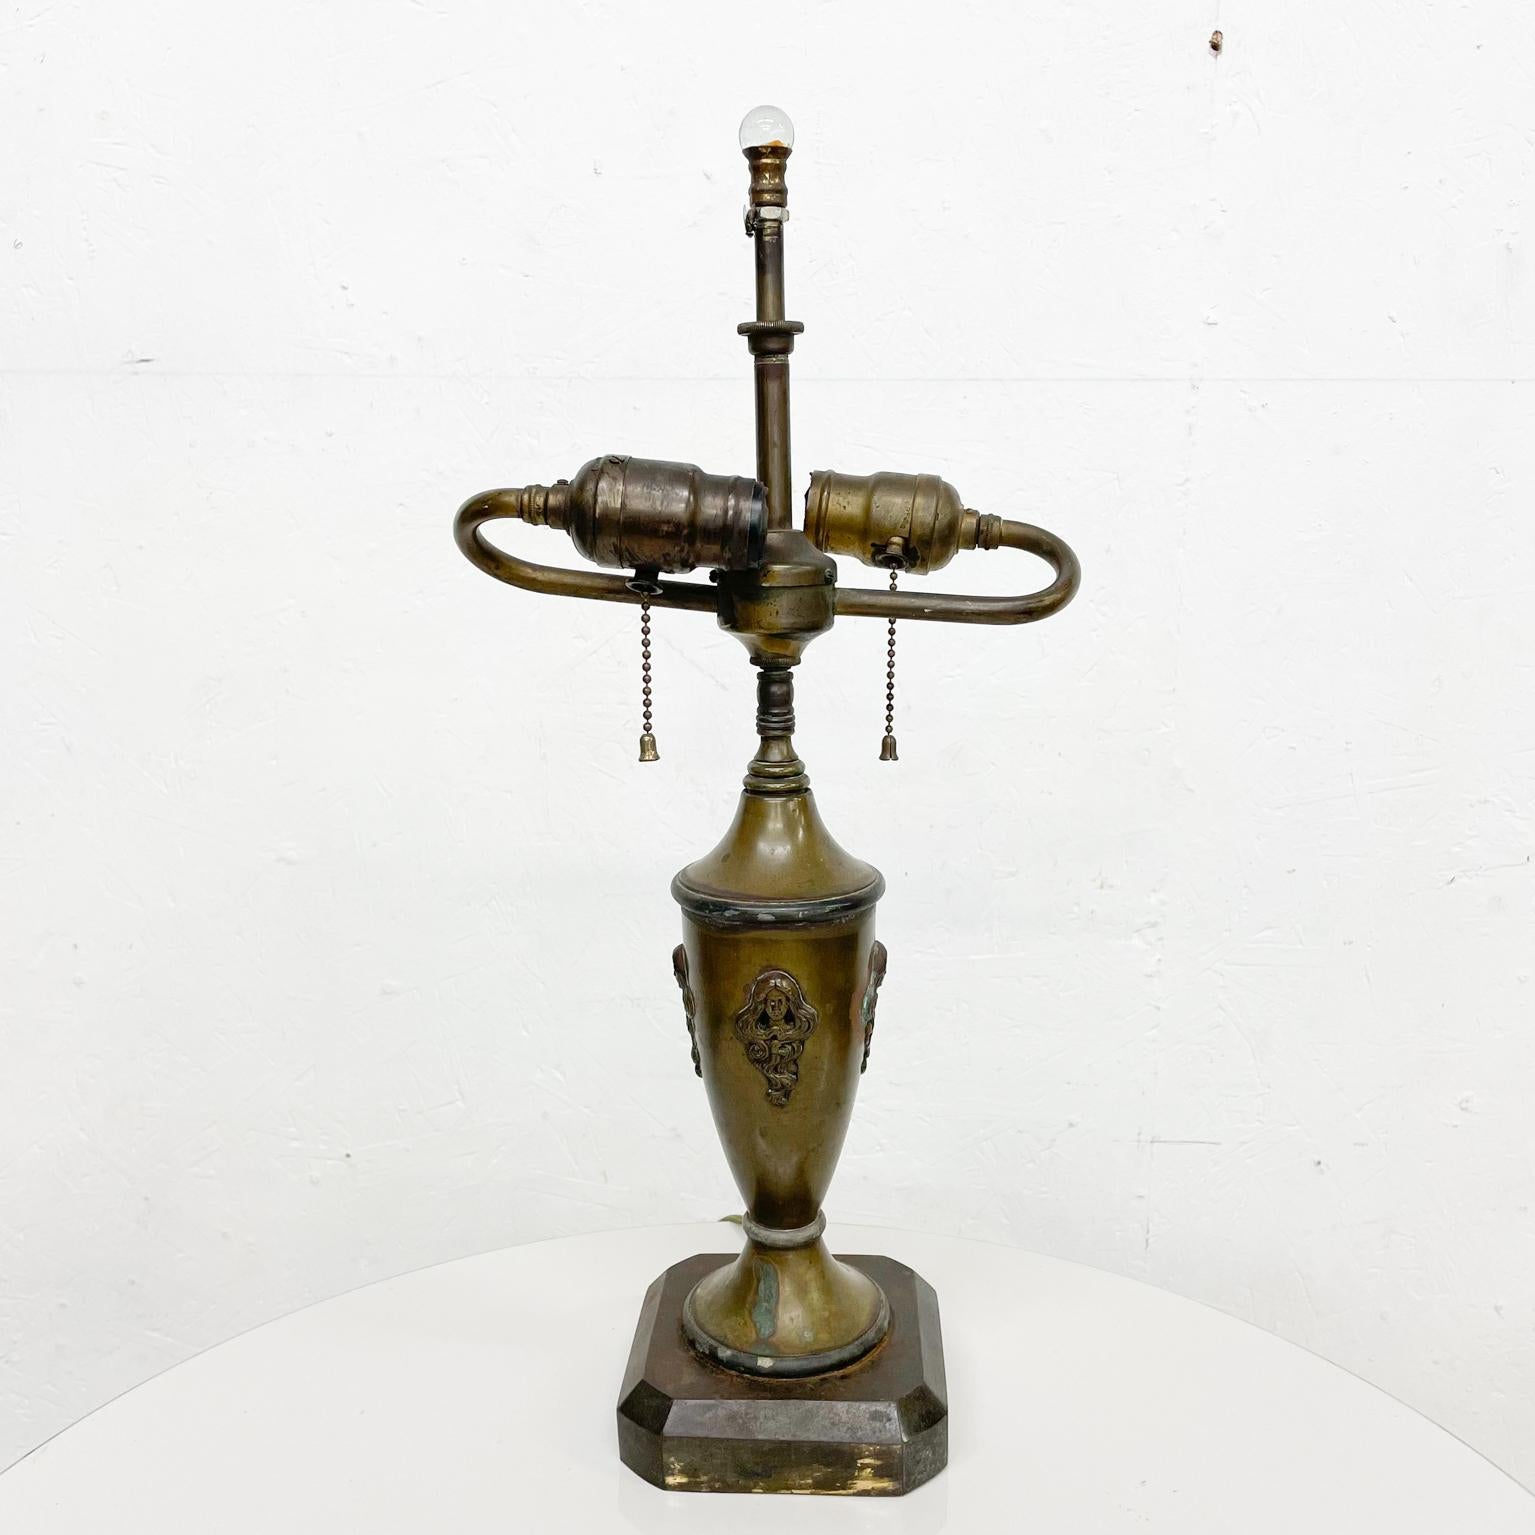 Table lamp
Single table vintage bronze and patinated brass lamp decorative Art Nouveau 
Unmarked
19 H top of glass finial x 9 W x 4.75 D
Original unrestored untested vintage condition. It requires two regular bulbs. No shade. Patina present
See